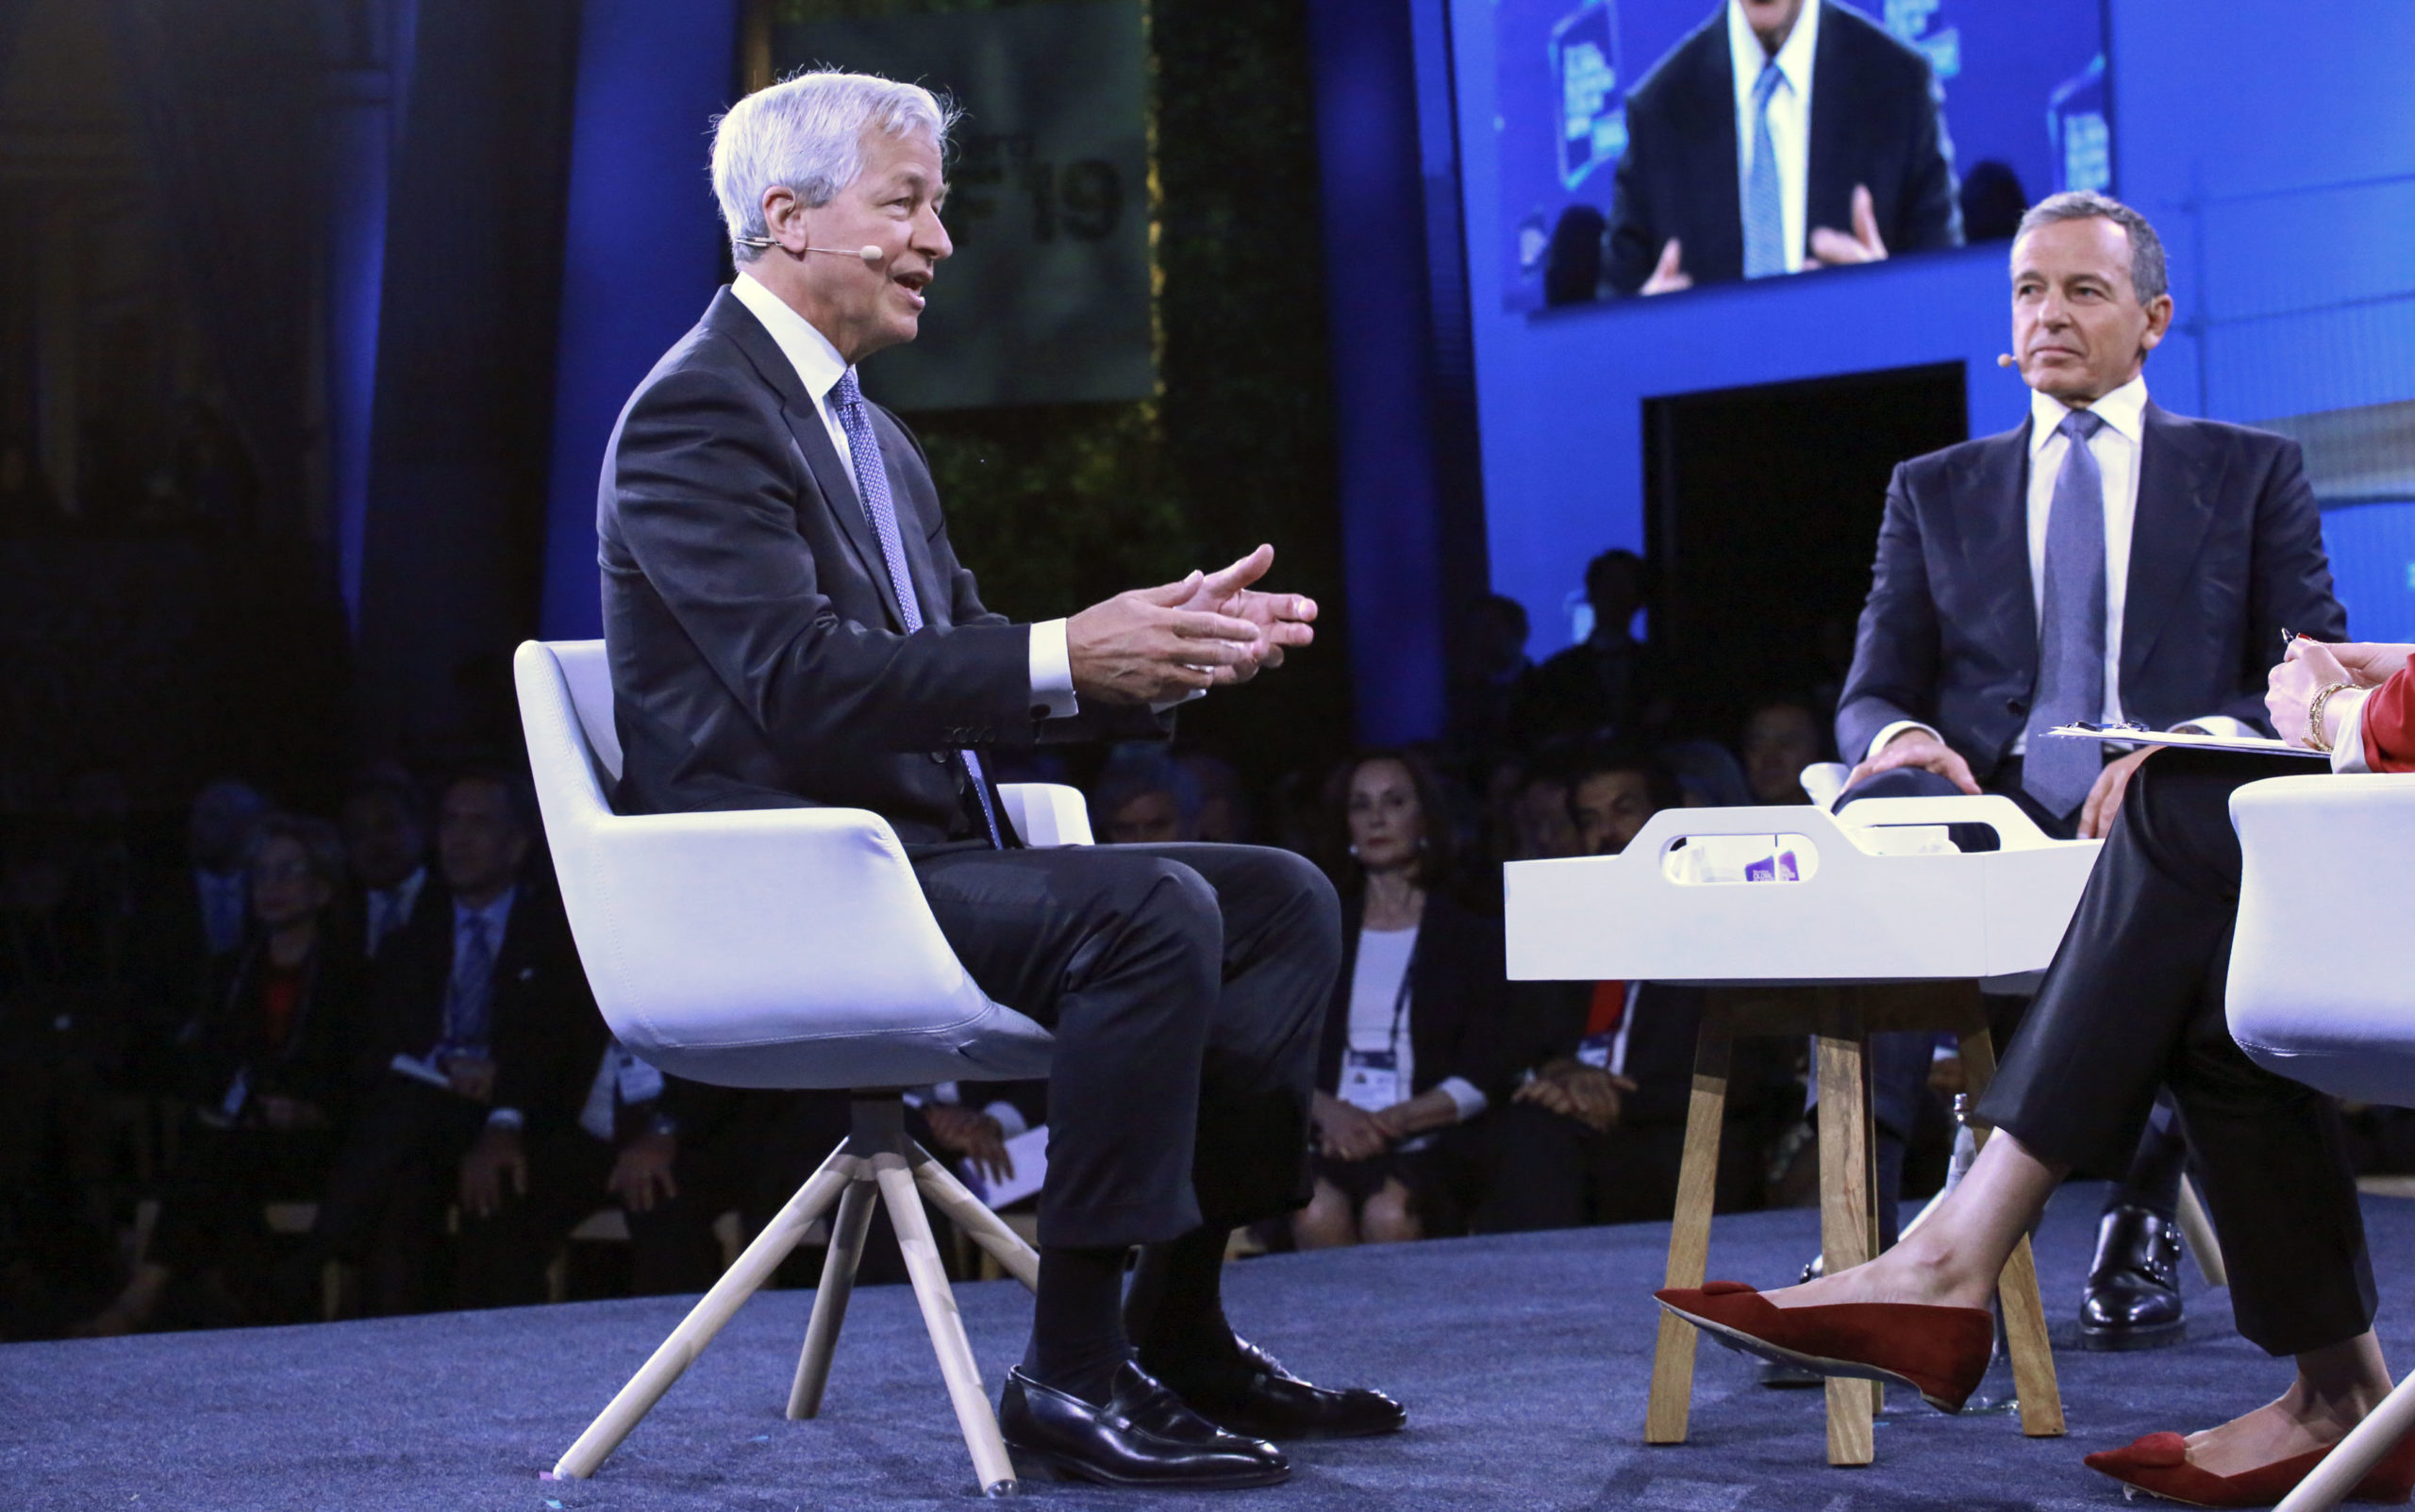 Jamie Dimon, Chairman & CEO of JP Morgan Chase & Co, speaks during the Bloomberg Global Business Forum in New York on September 25, 2019. (Photo by Kena Betancur / AFP) (Photo credit KENA BETANCUR/AFP via Getty Images)